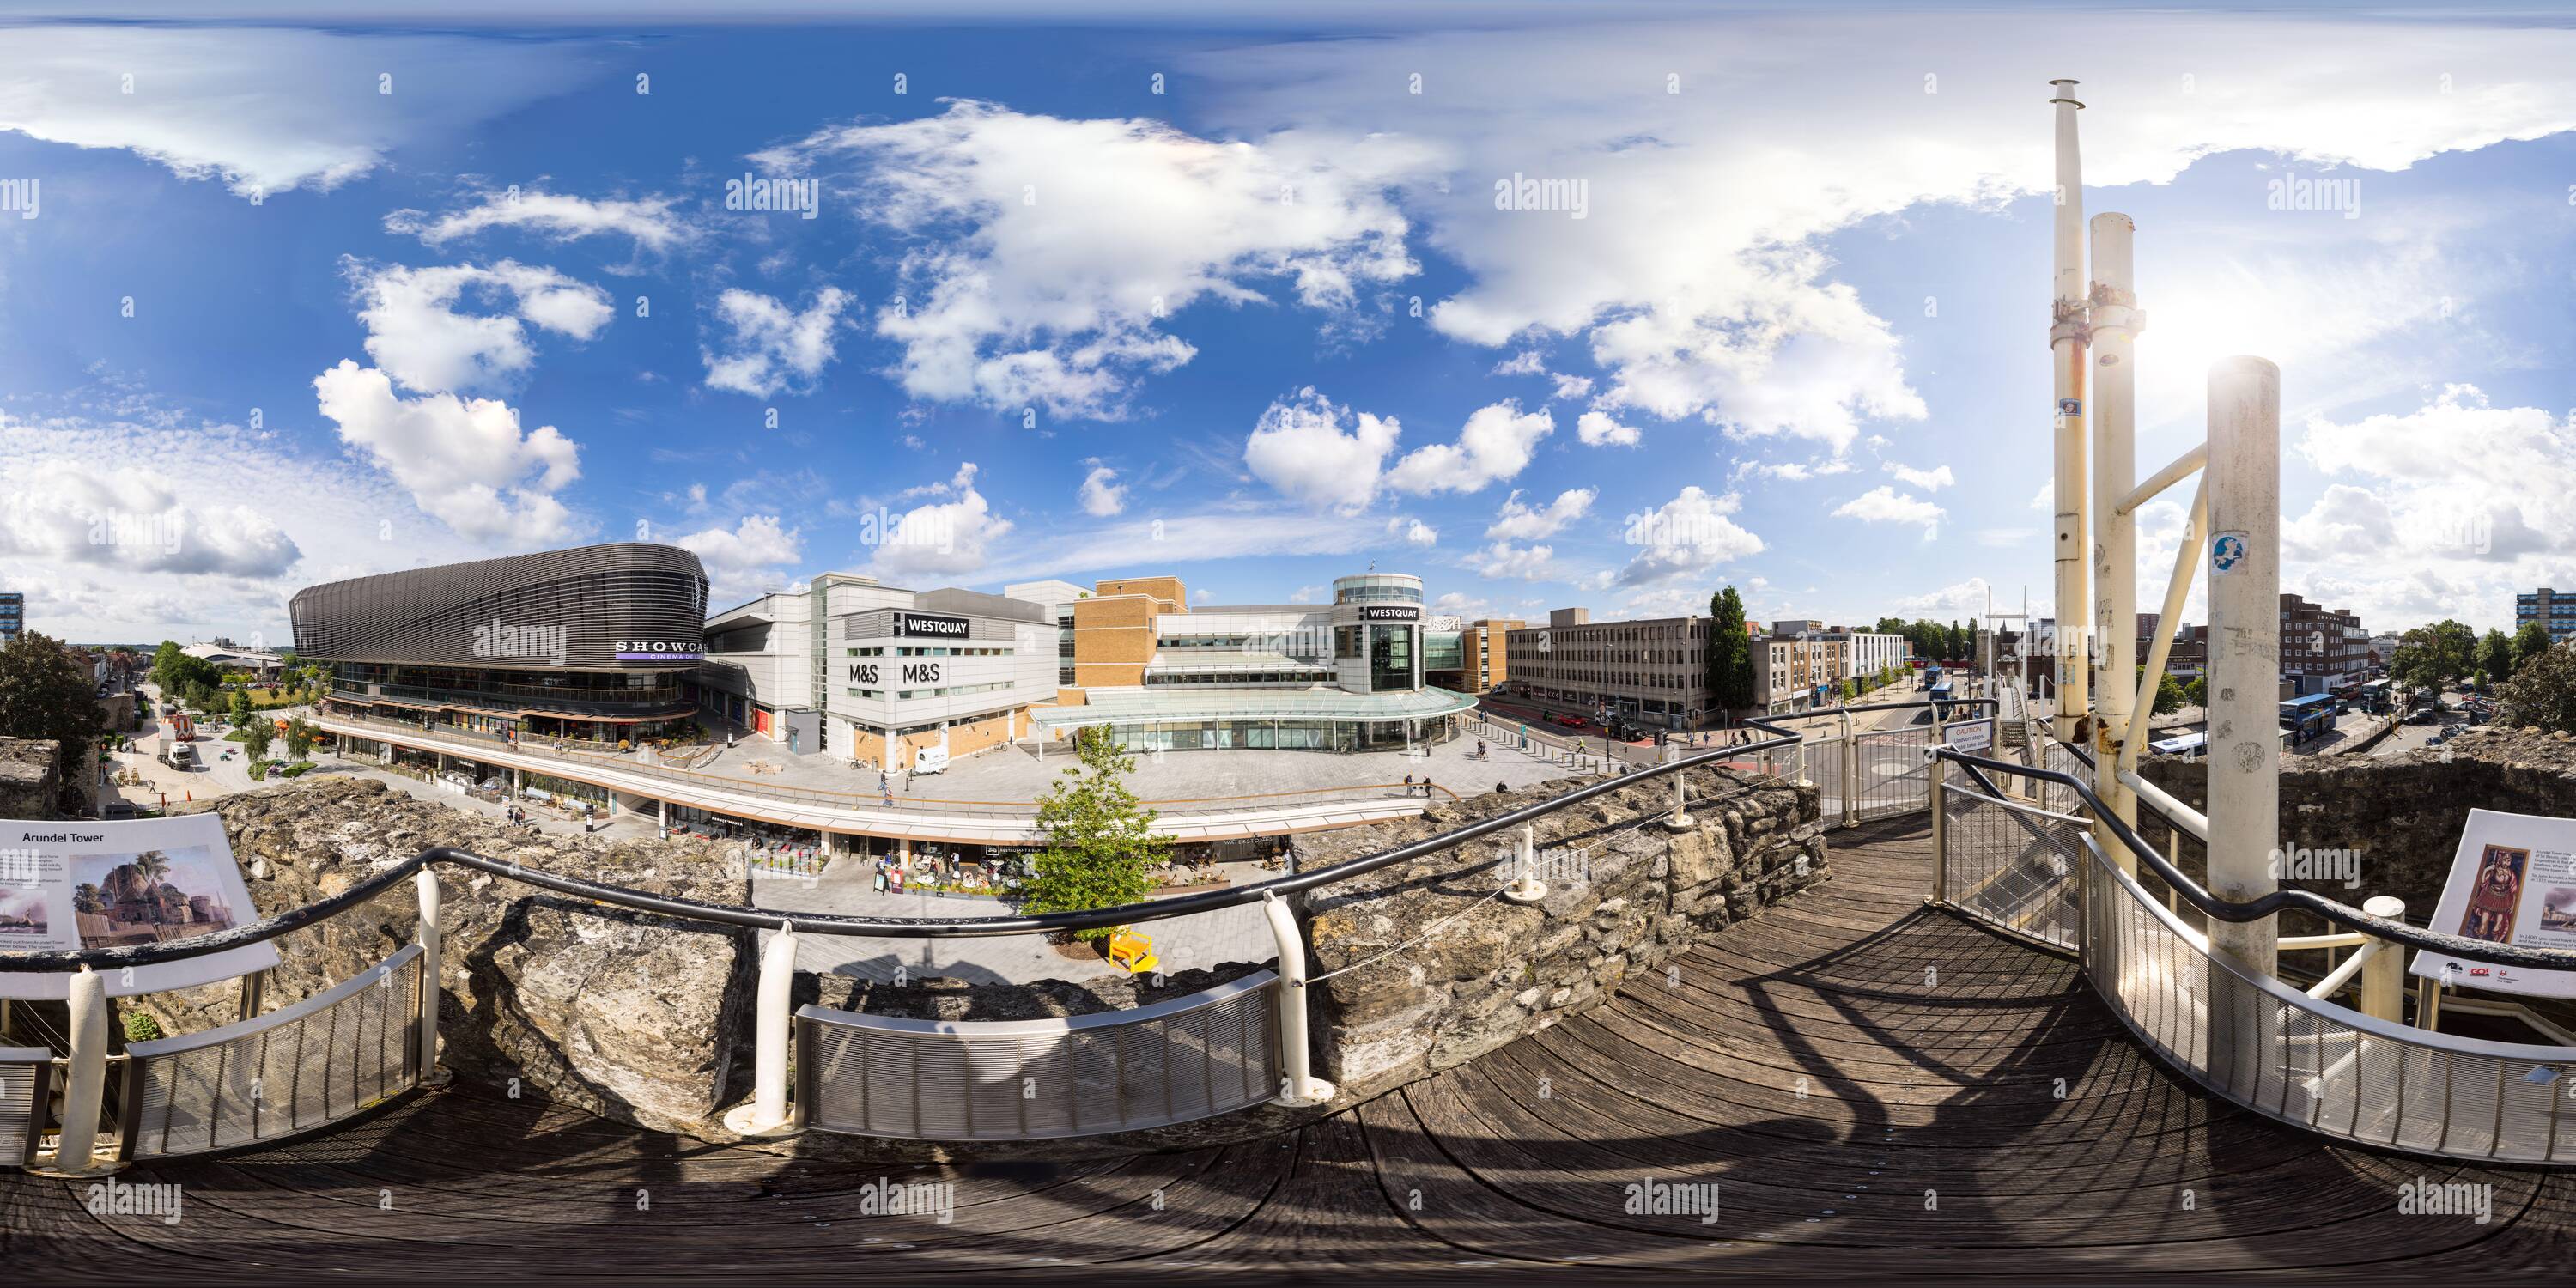 360 degree panoramic view of The Showcase Cinema and West Quay shopping centre viewed from Arundel Tower; part of Southampton's historic city wall.